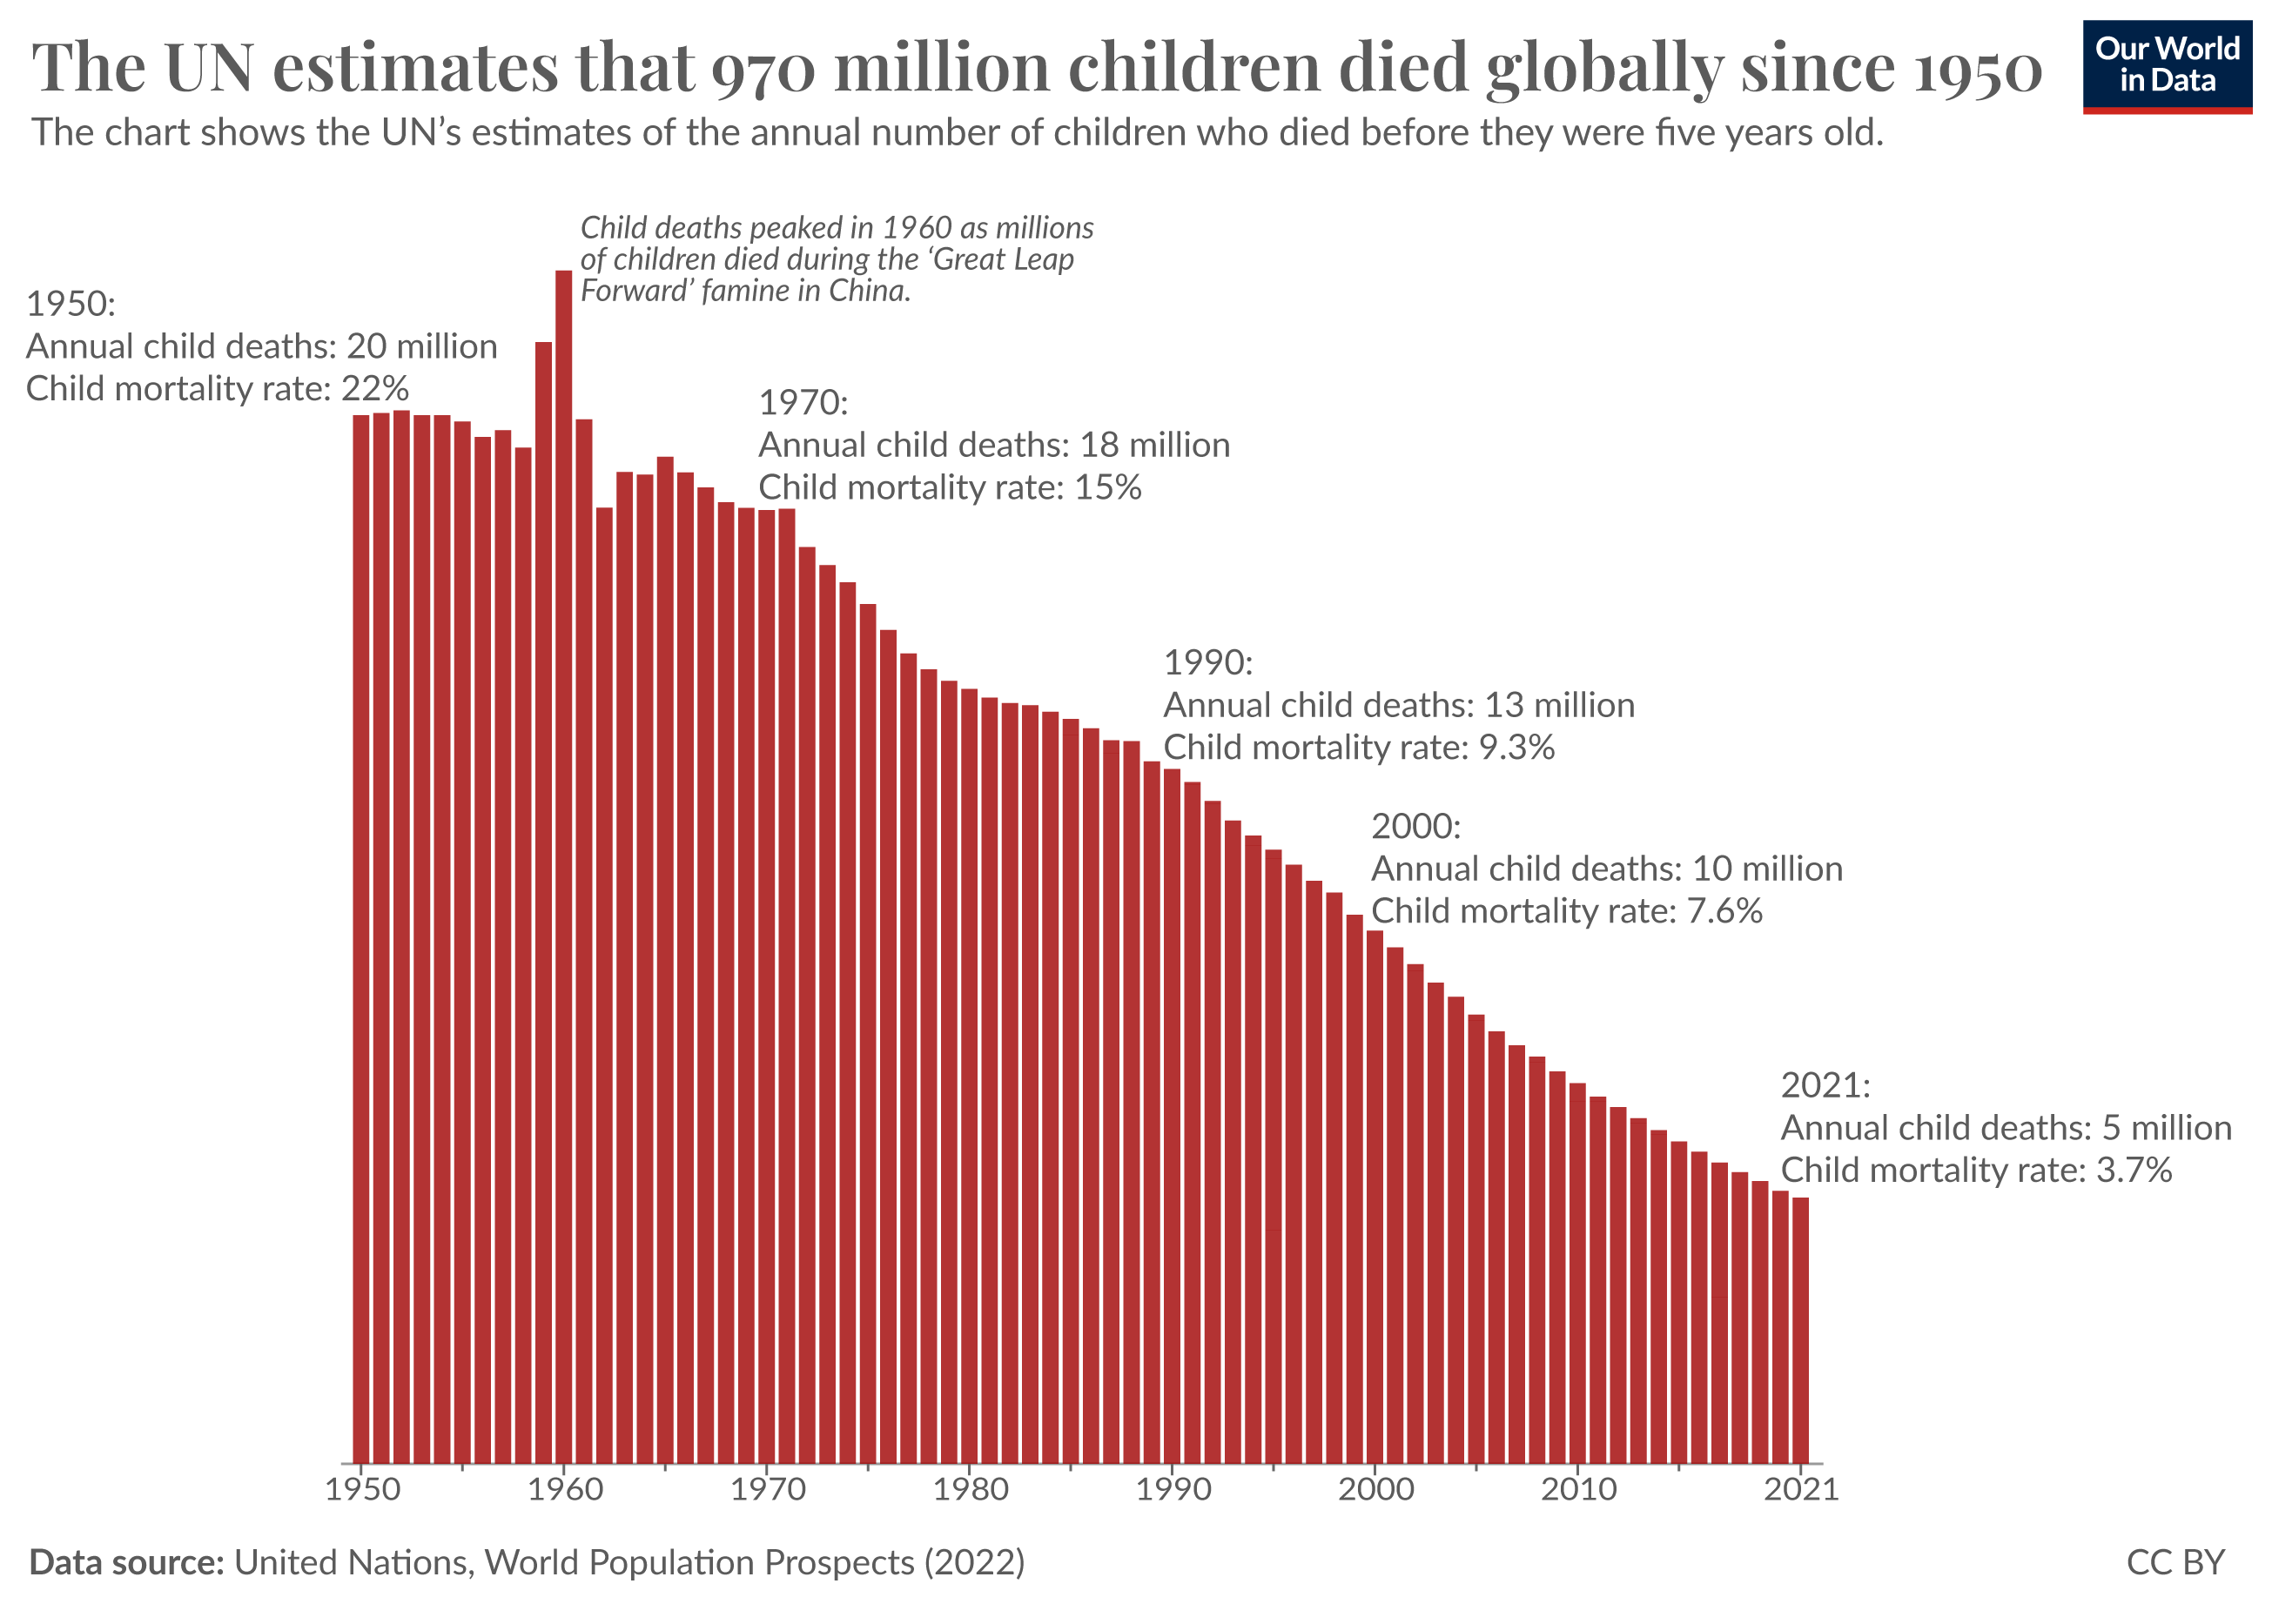 A chart showing that 970 million children died globally since 1950